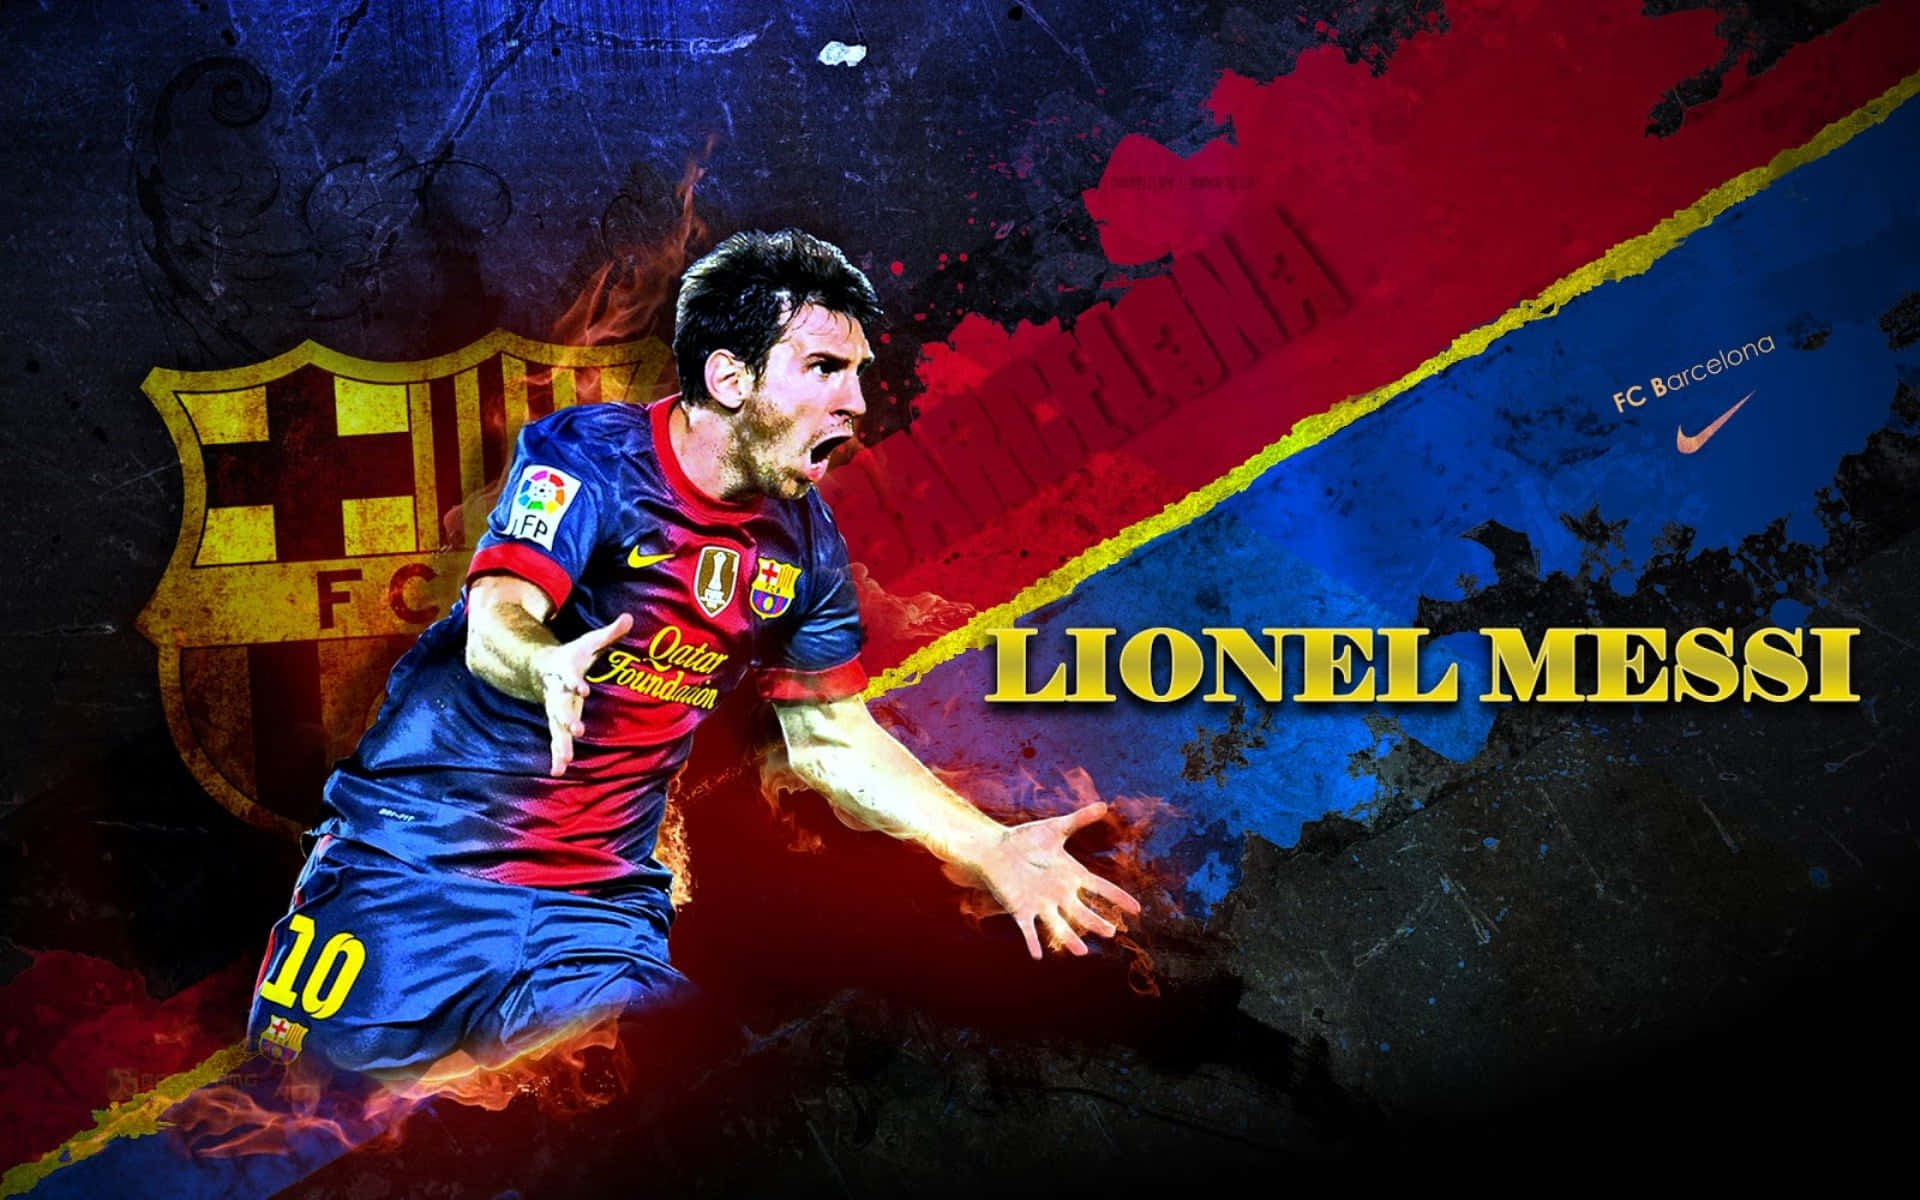 Lionel Messi Chilling in Style Wallpaper